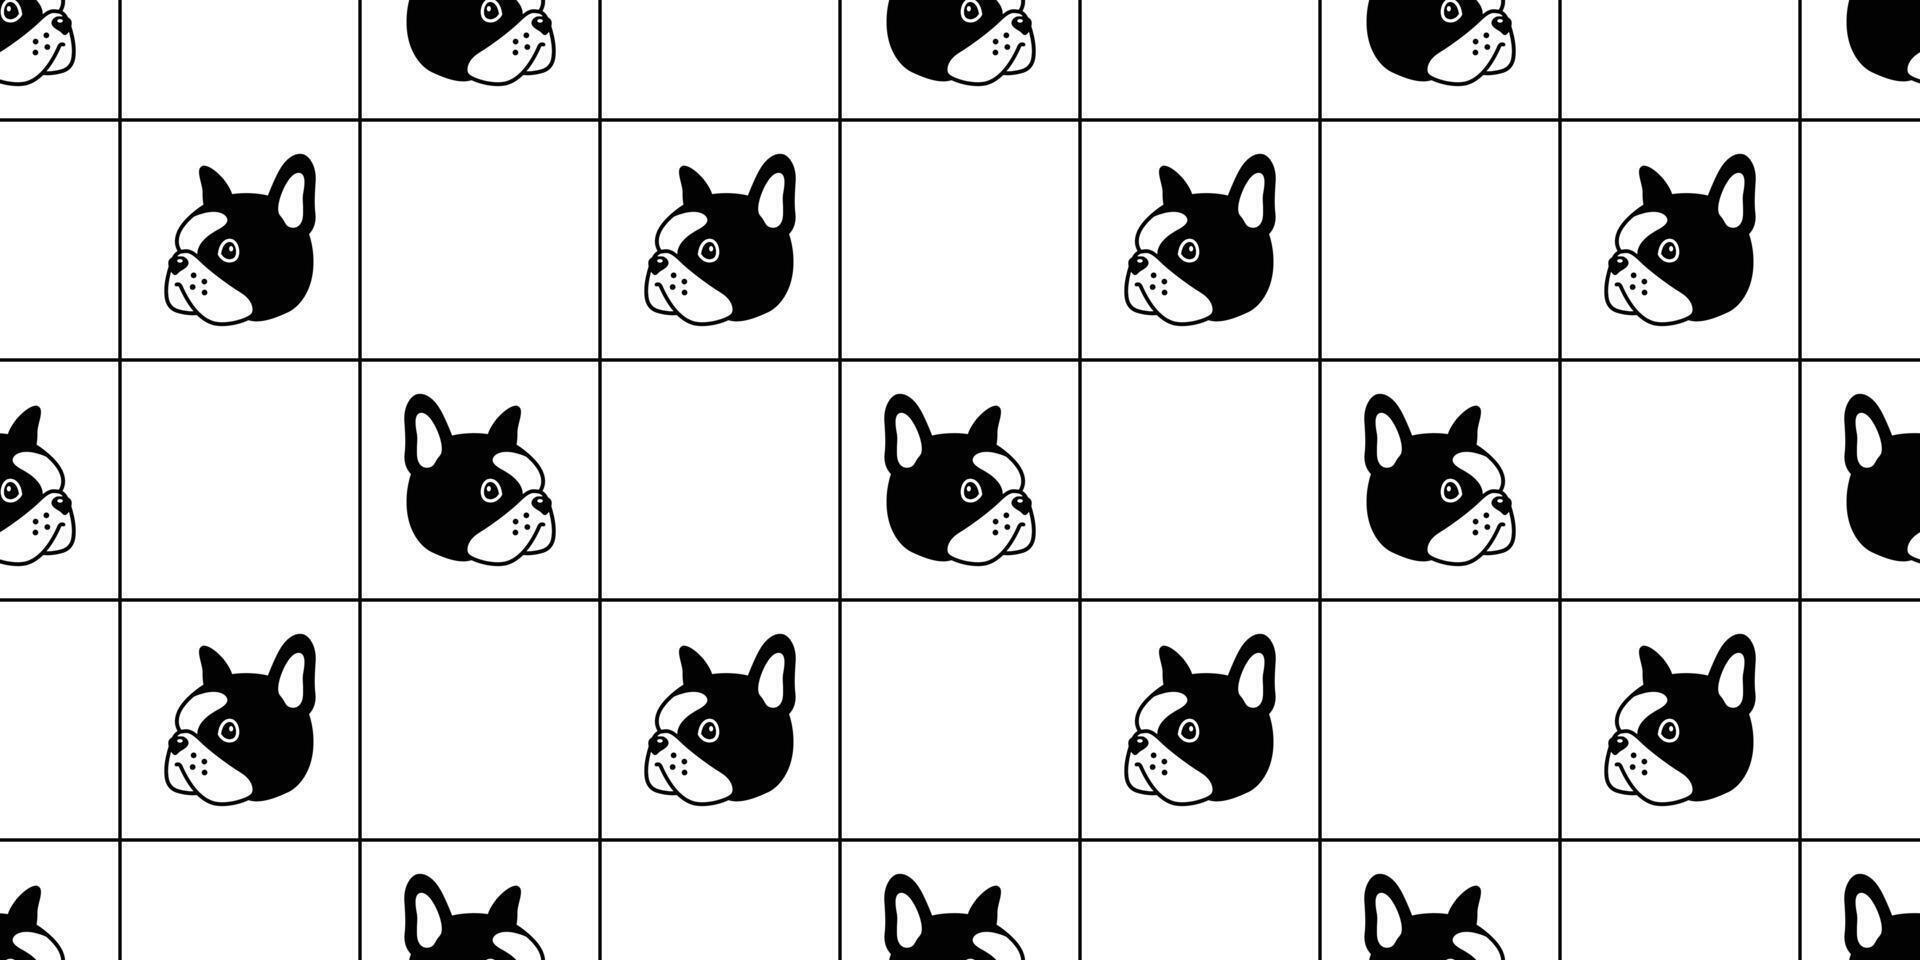 dog seamless pattern french bulldog vector checked scarf isolated repeat wallpaper tile background cartoon doodle illustration design